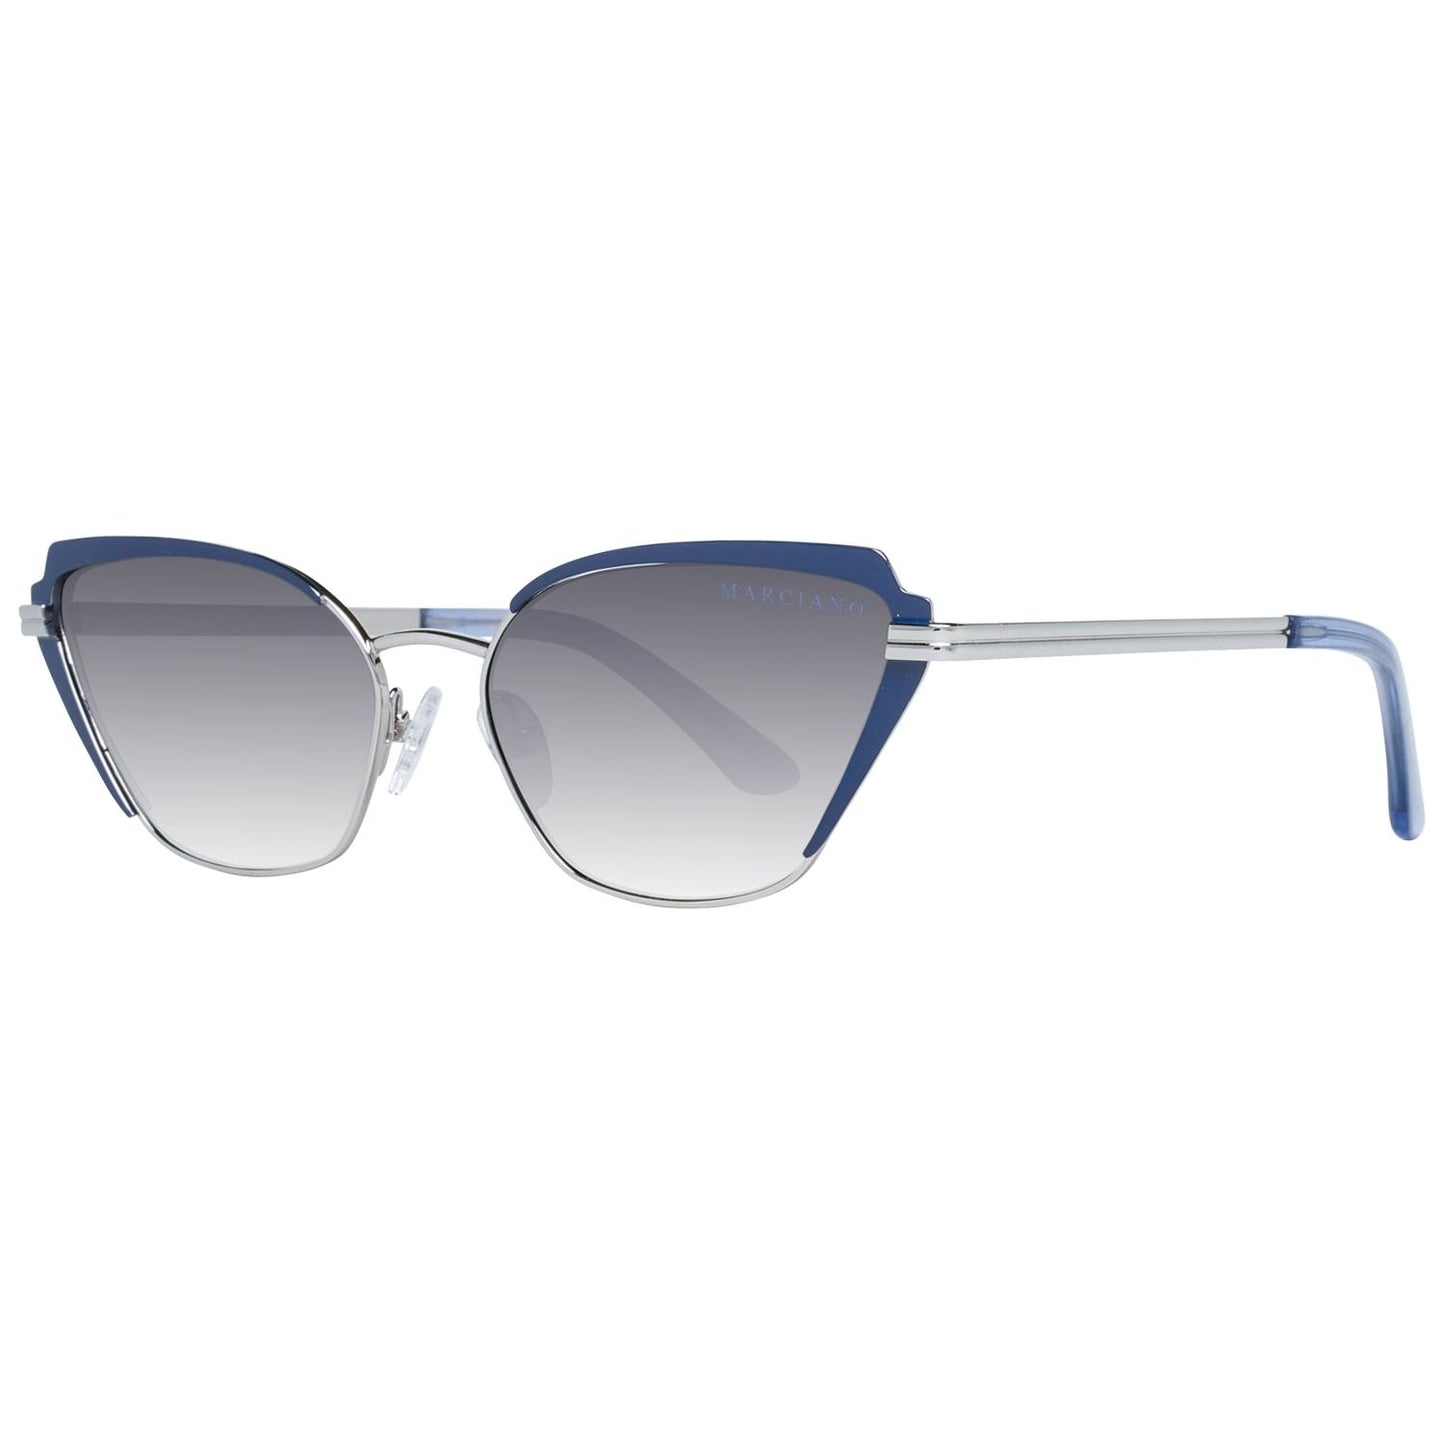 MARCIANO By GUESS SUNGLASSES MARCIANO BY GUESS MOD. GM0818 5610W SUNGLASSES & EYEWEAR marciano-by-guess-mod-gm0818-5610w